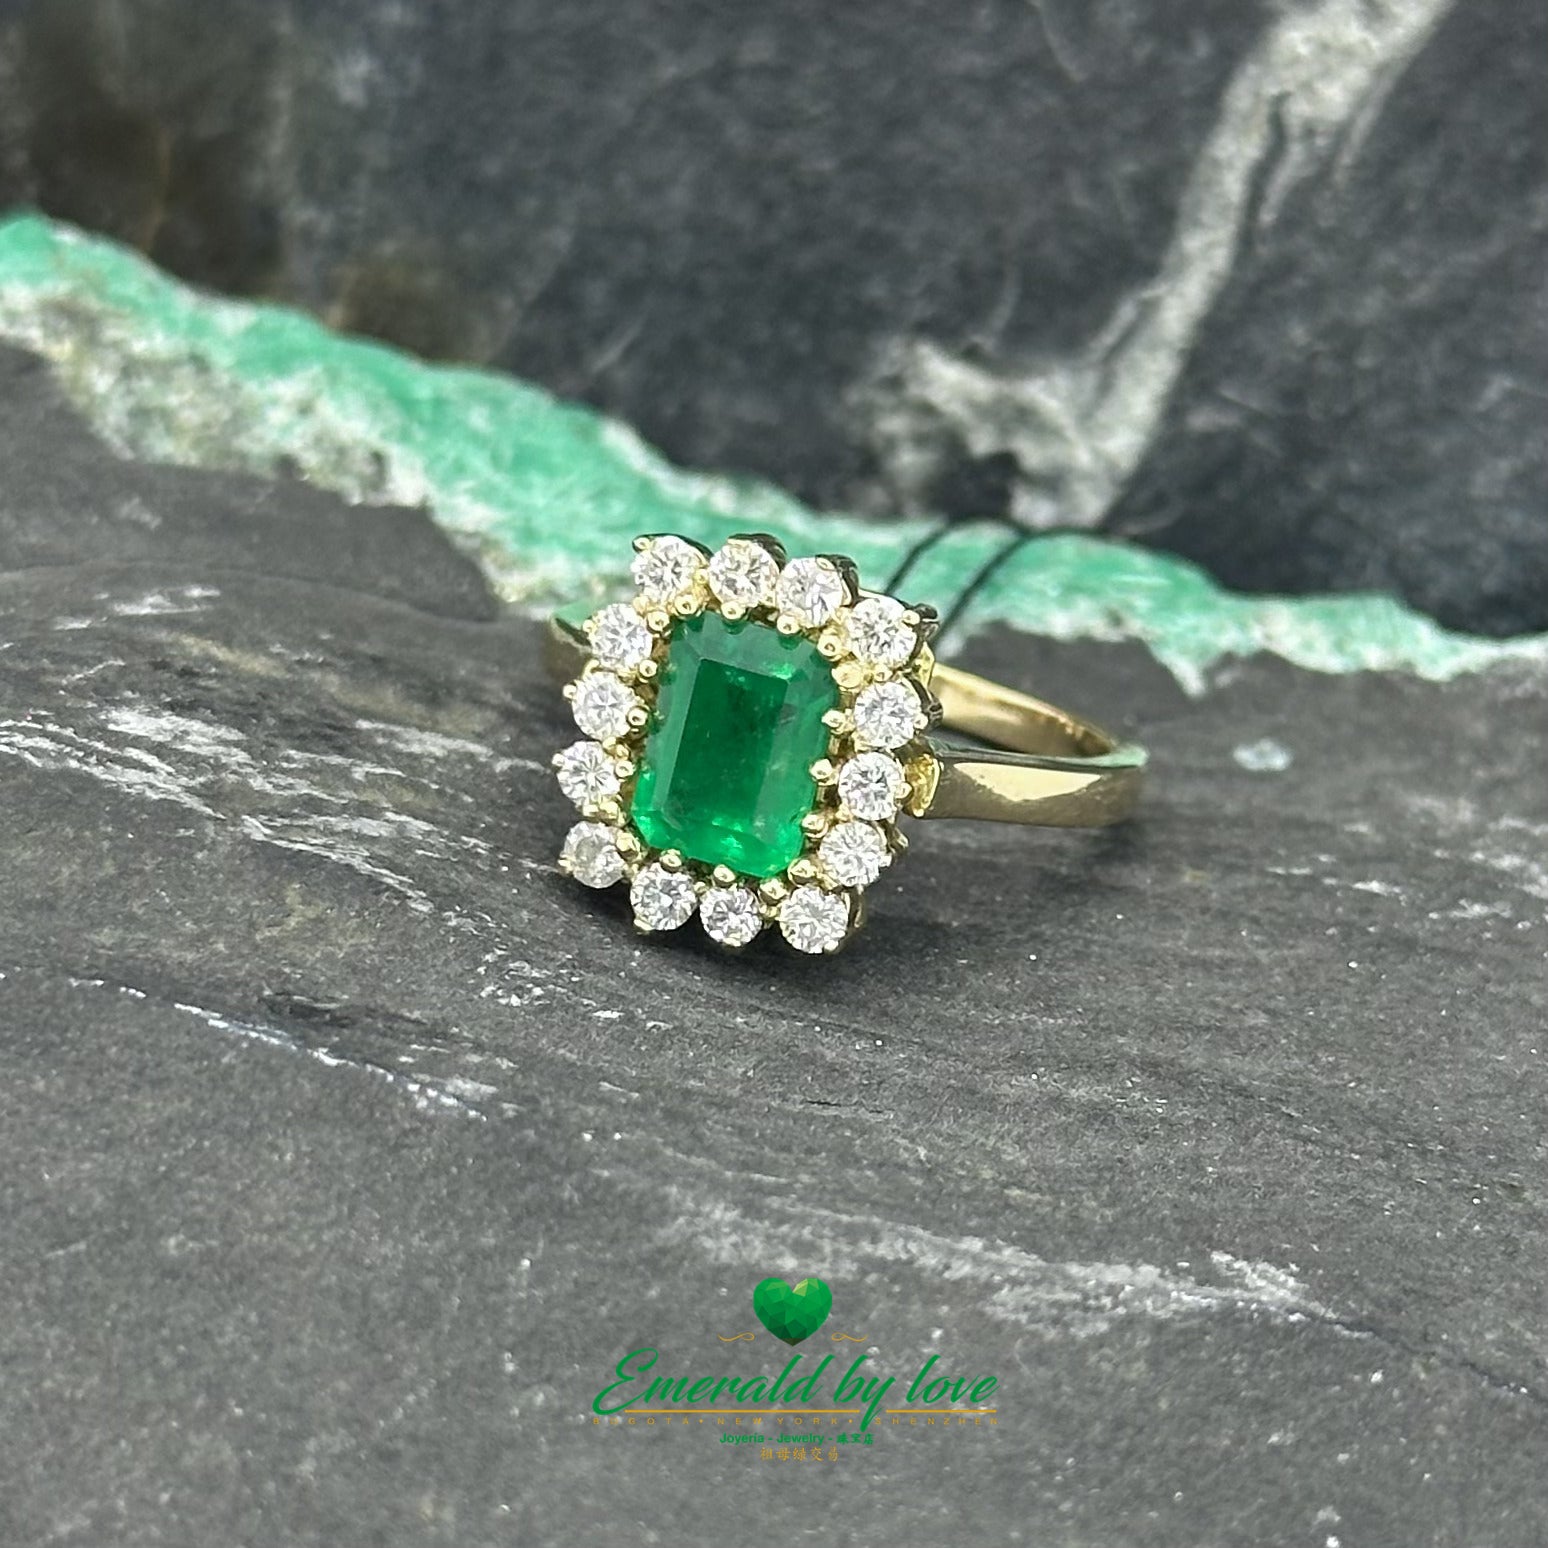 Yellow Gold Marquise Pendant with Rectangular Emerald Center and Diamond Halo